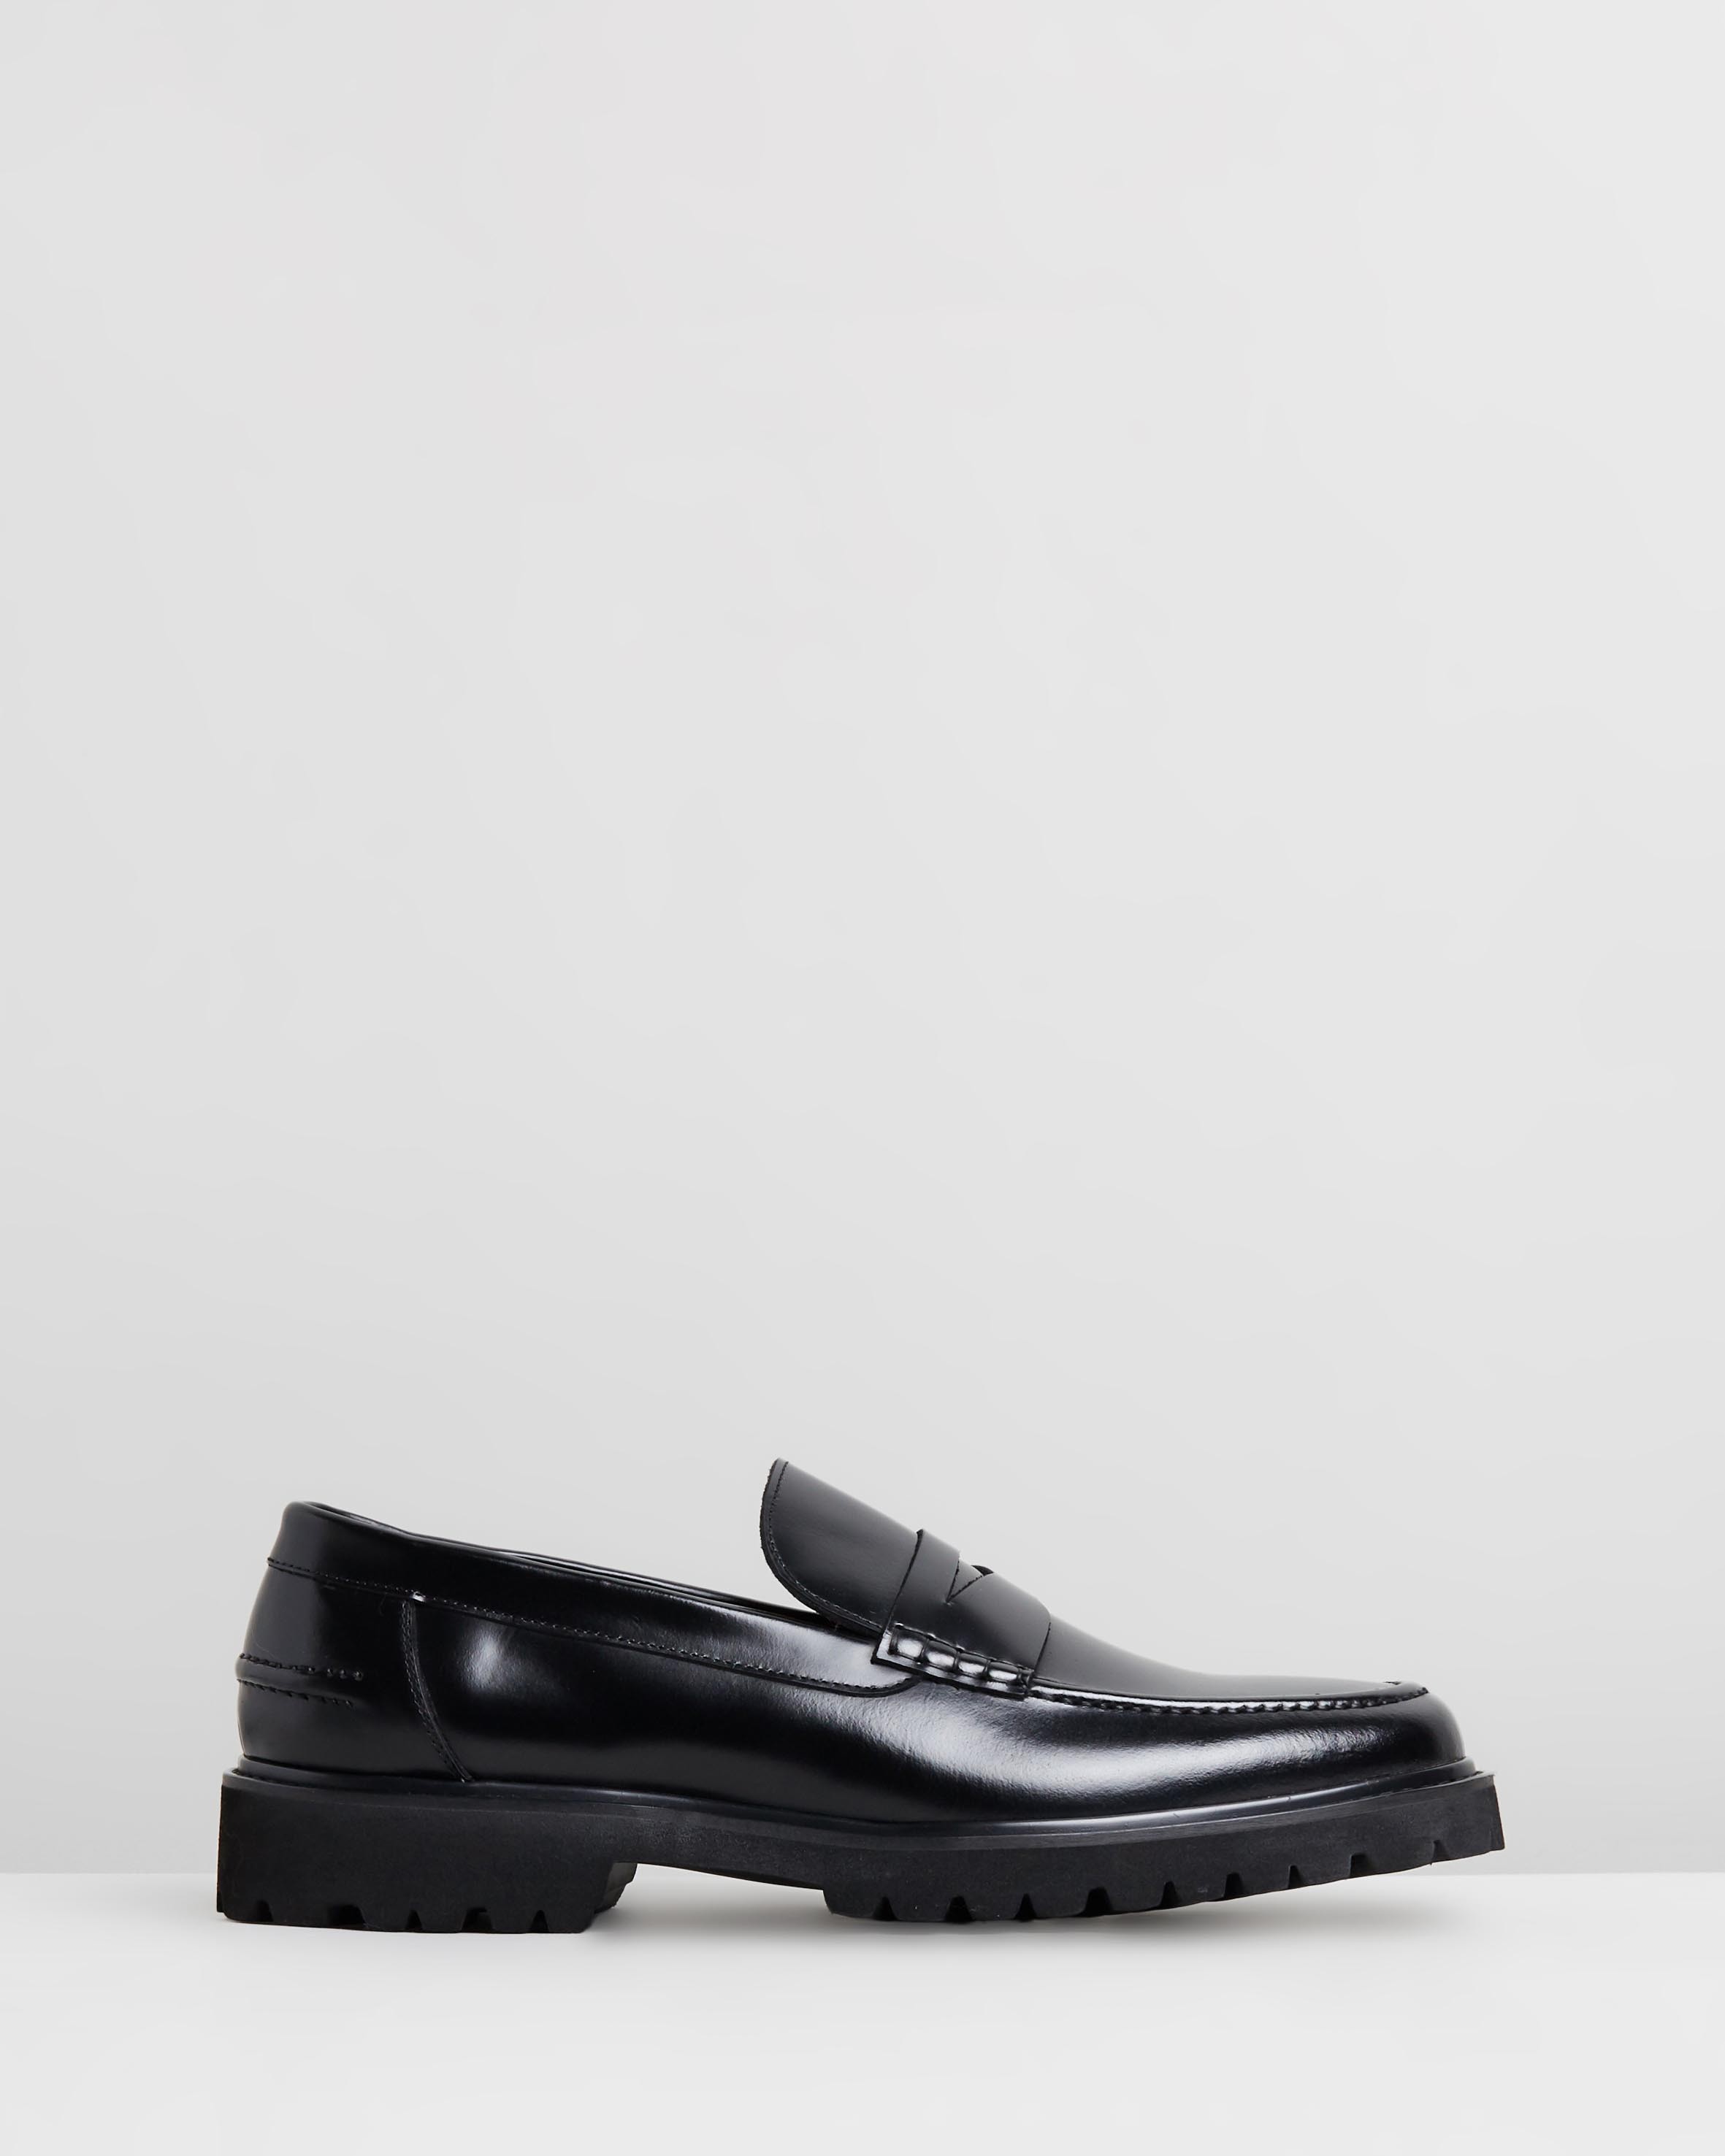 Busan Leather Loafers Black by Double Oak Mills | ShoeSales